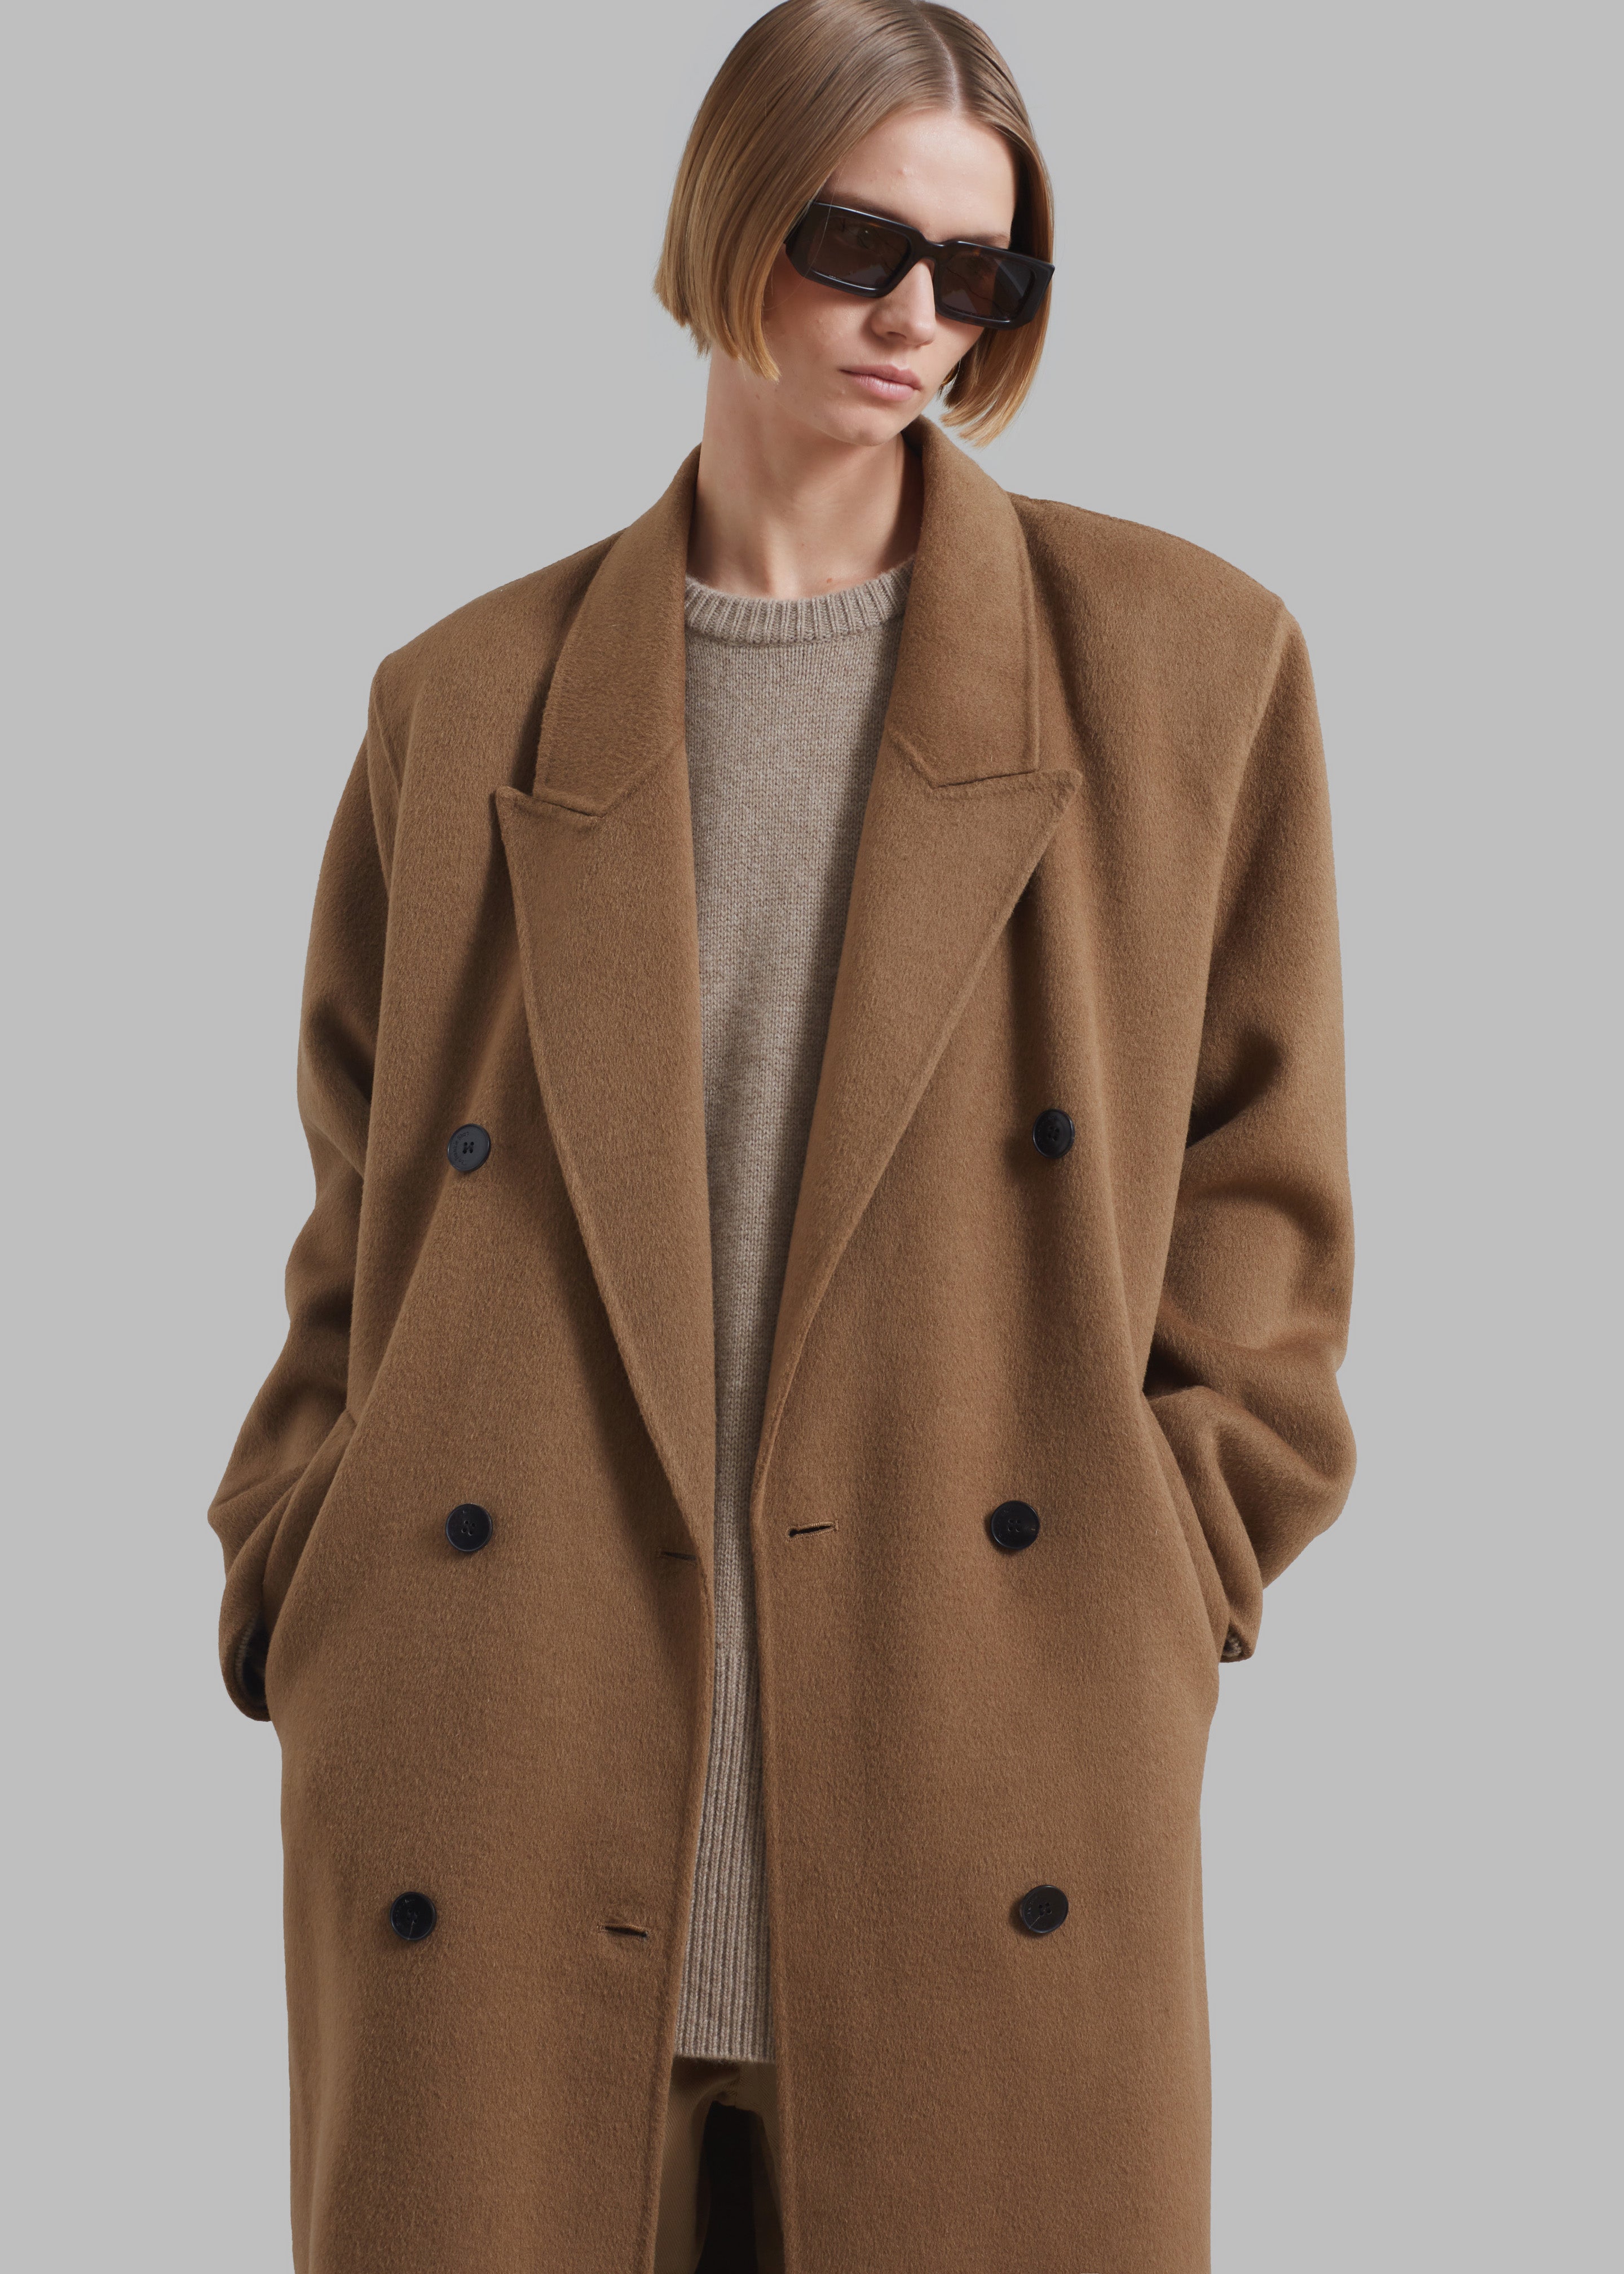 Gaia Double Breasted Coat - Camel - 5